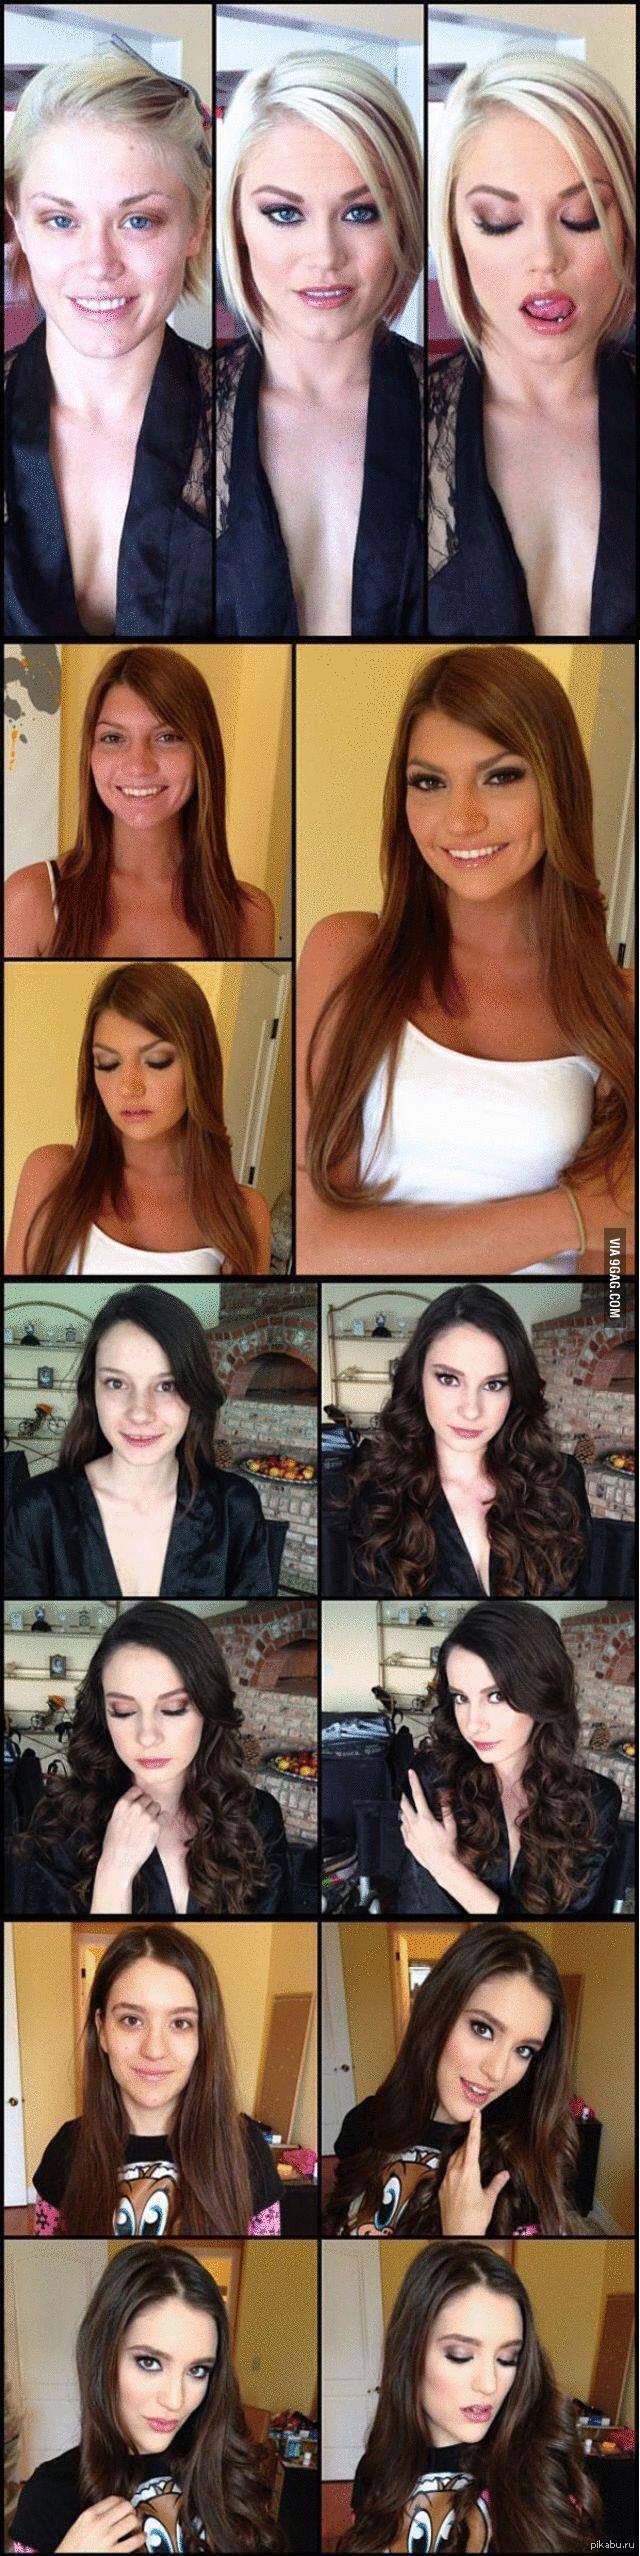 Porn actresses with and without makeup. - NSFW, Porn actress, Makeup, Longpost, Porn Actors and Porn Actresses